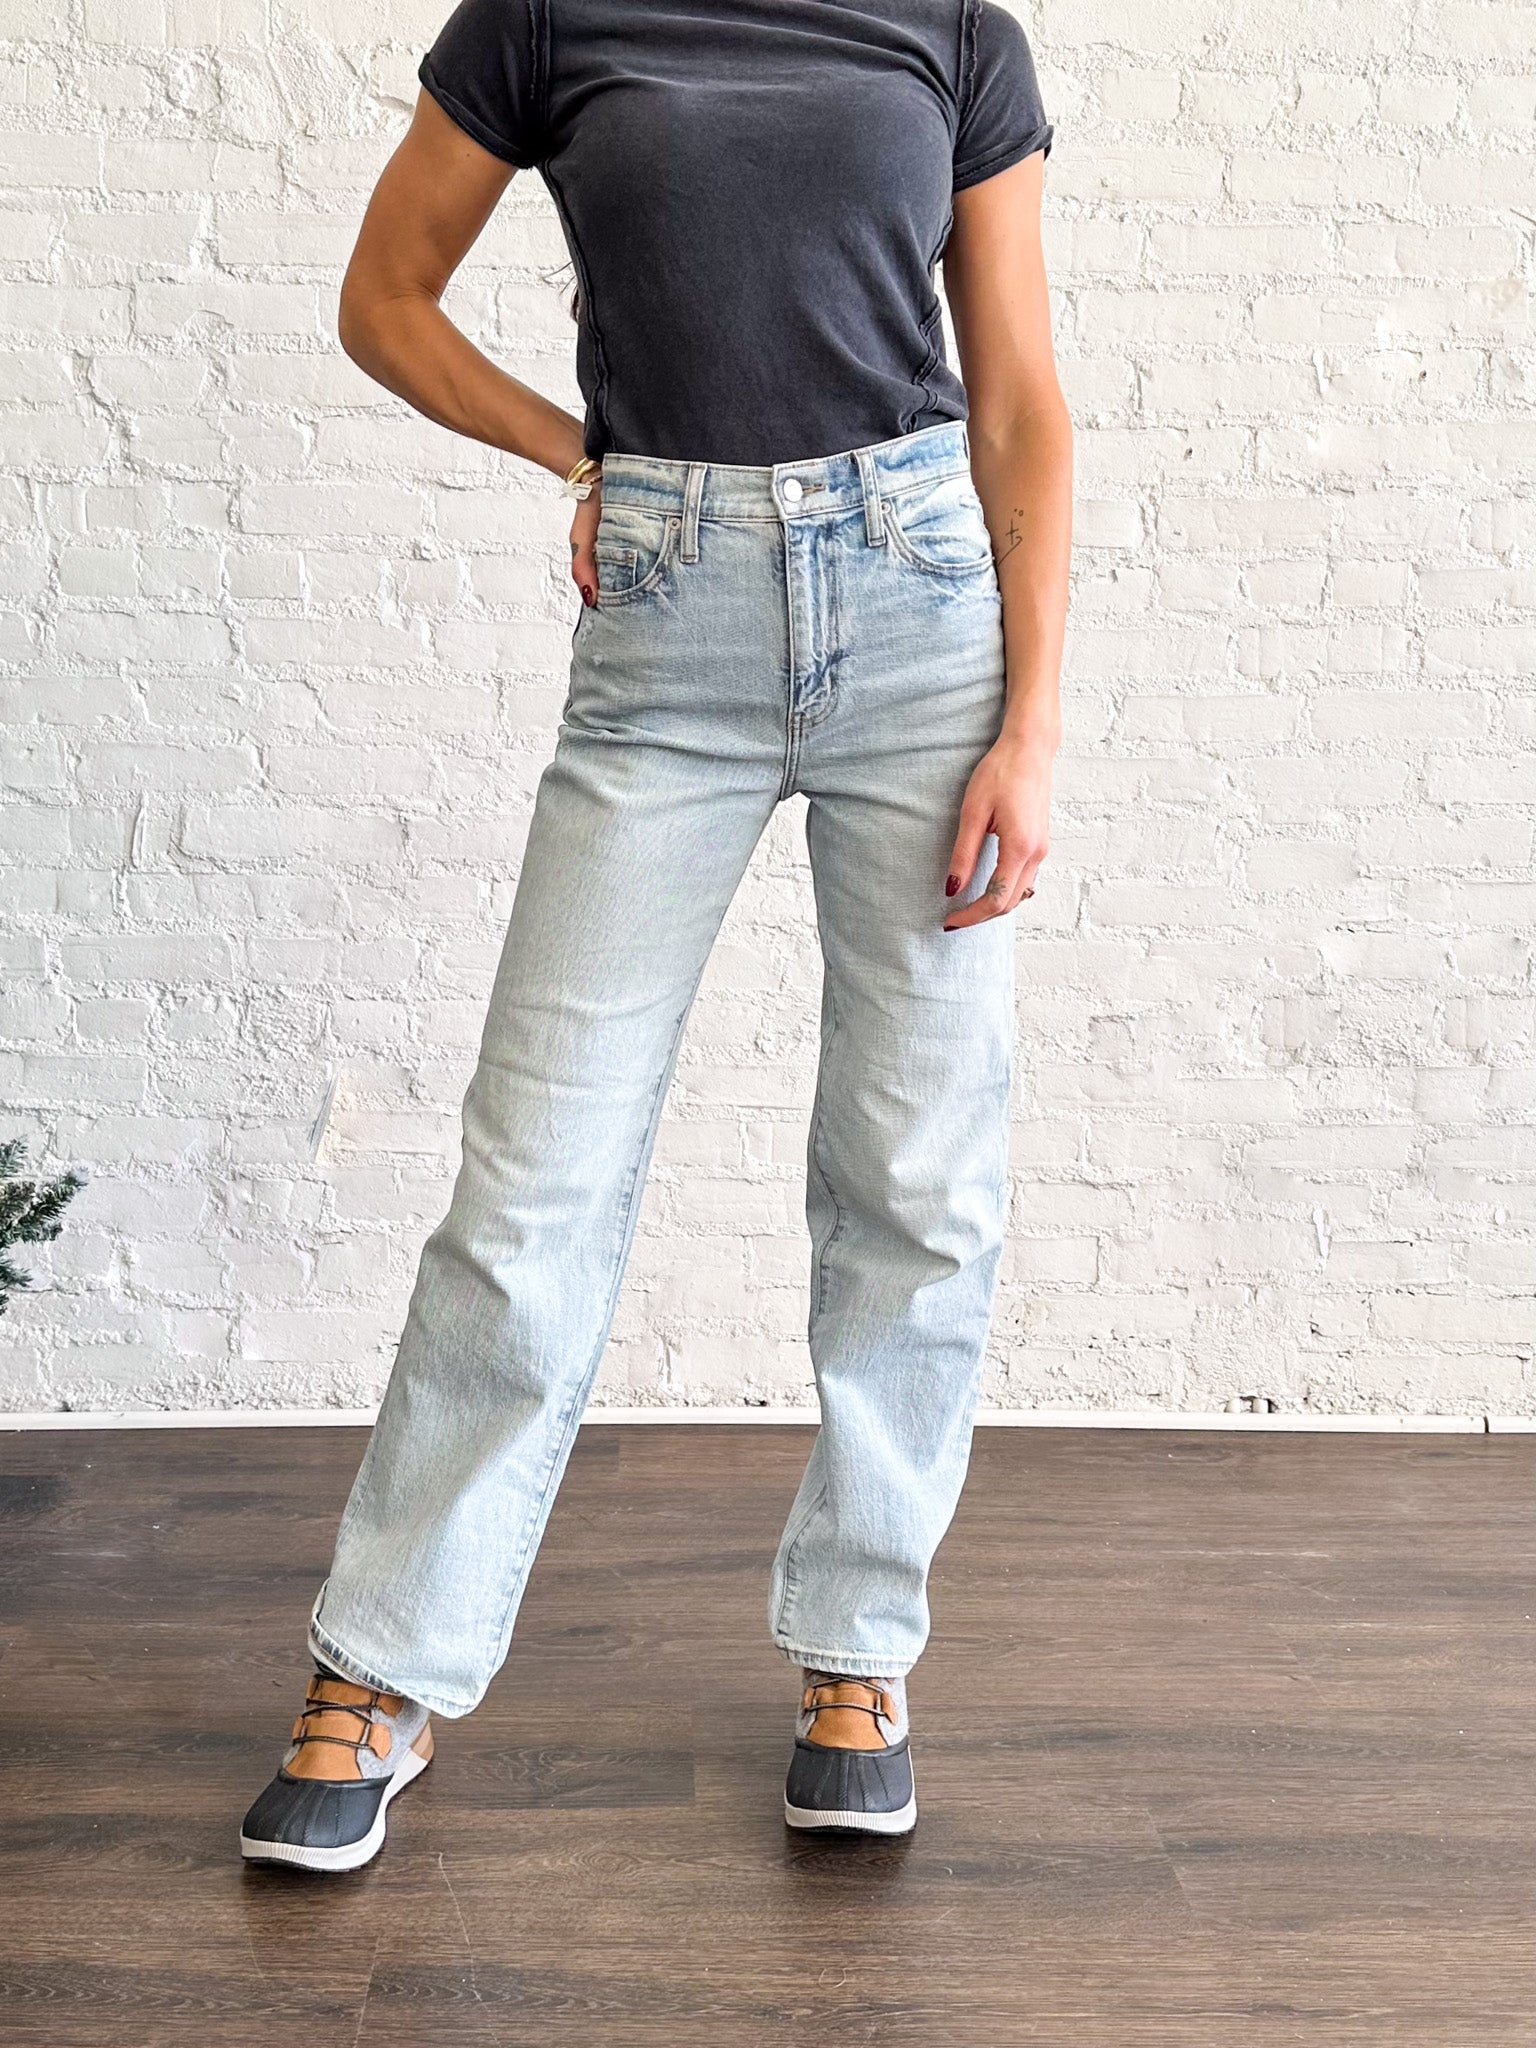 Casual Outfit With Boyfriend Jeans